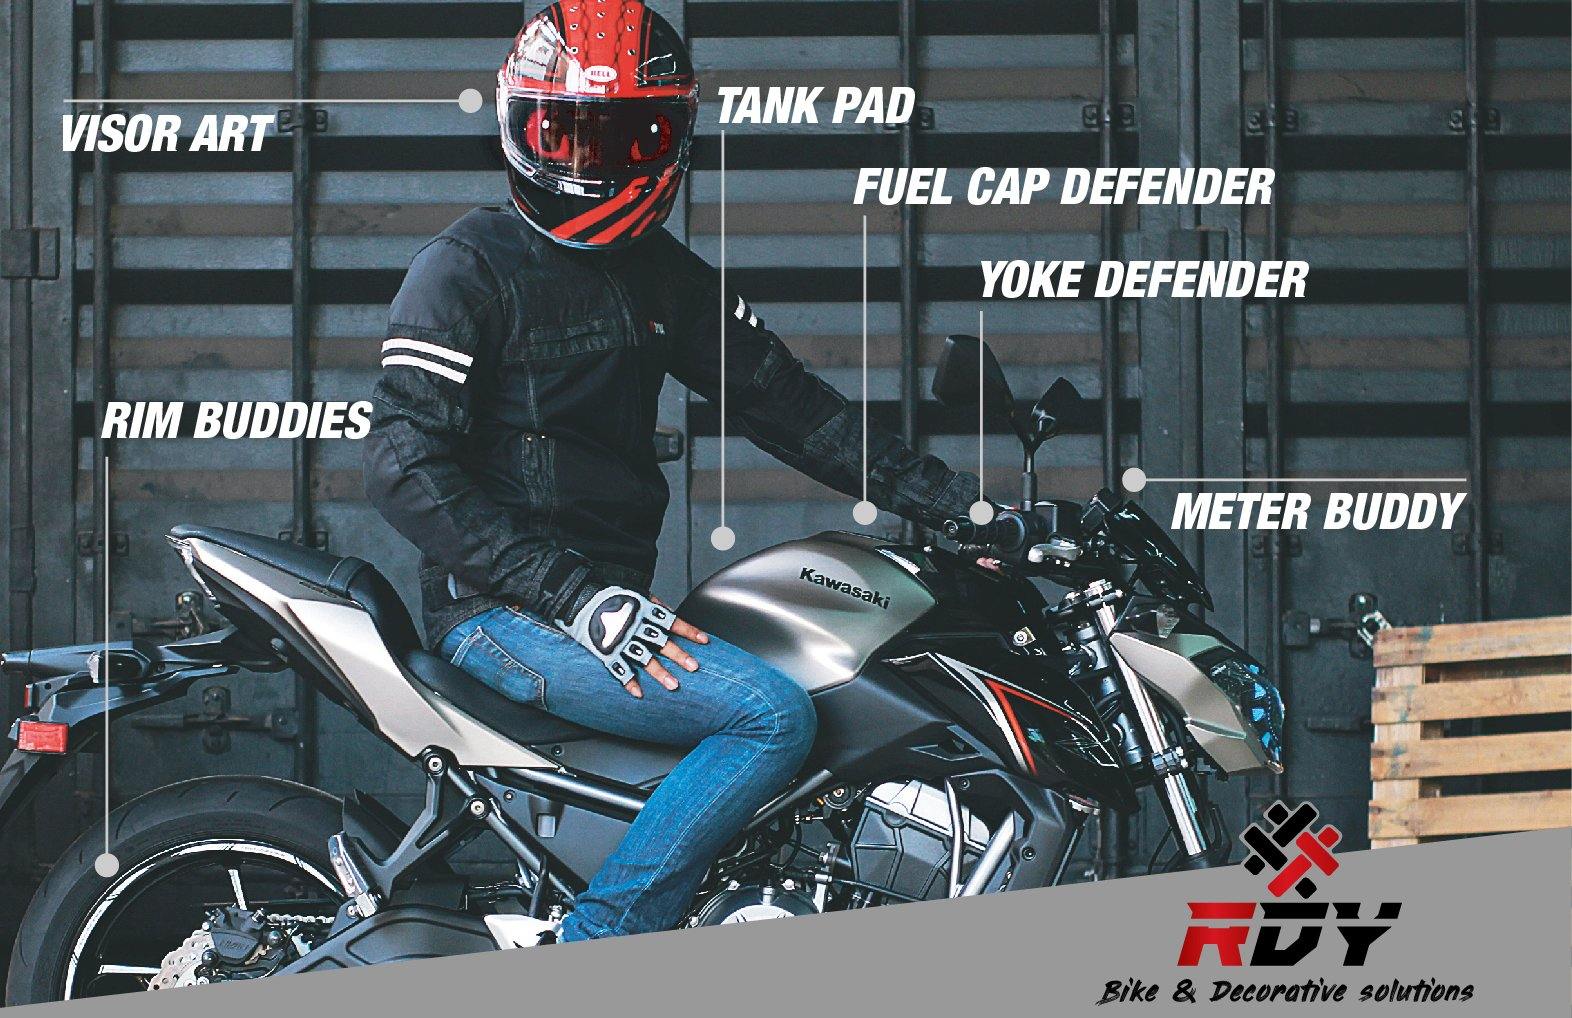 RDY Yoke Defender fits for Yamaha R1 ('07-'08) - Durian Bikers